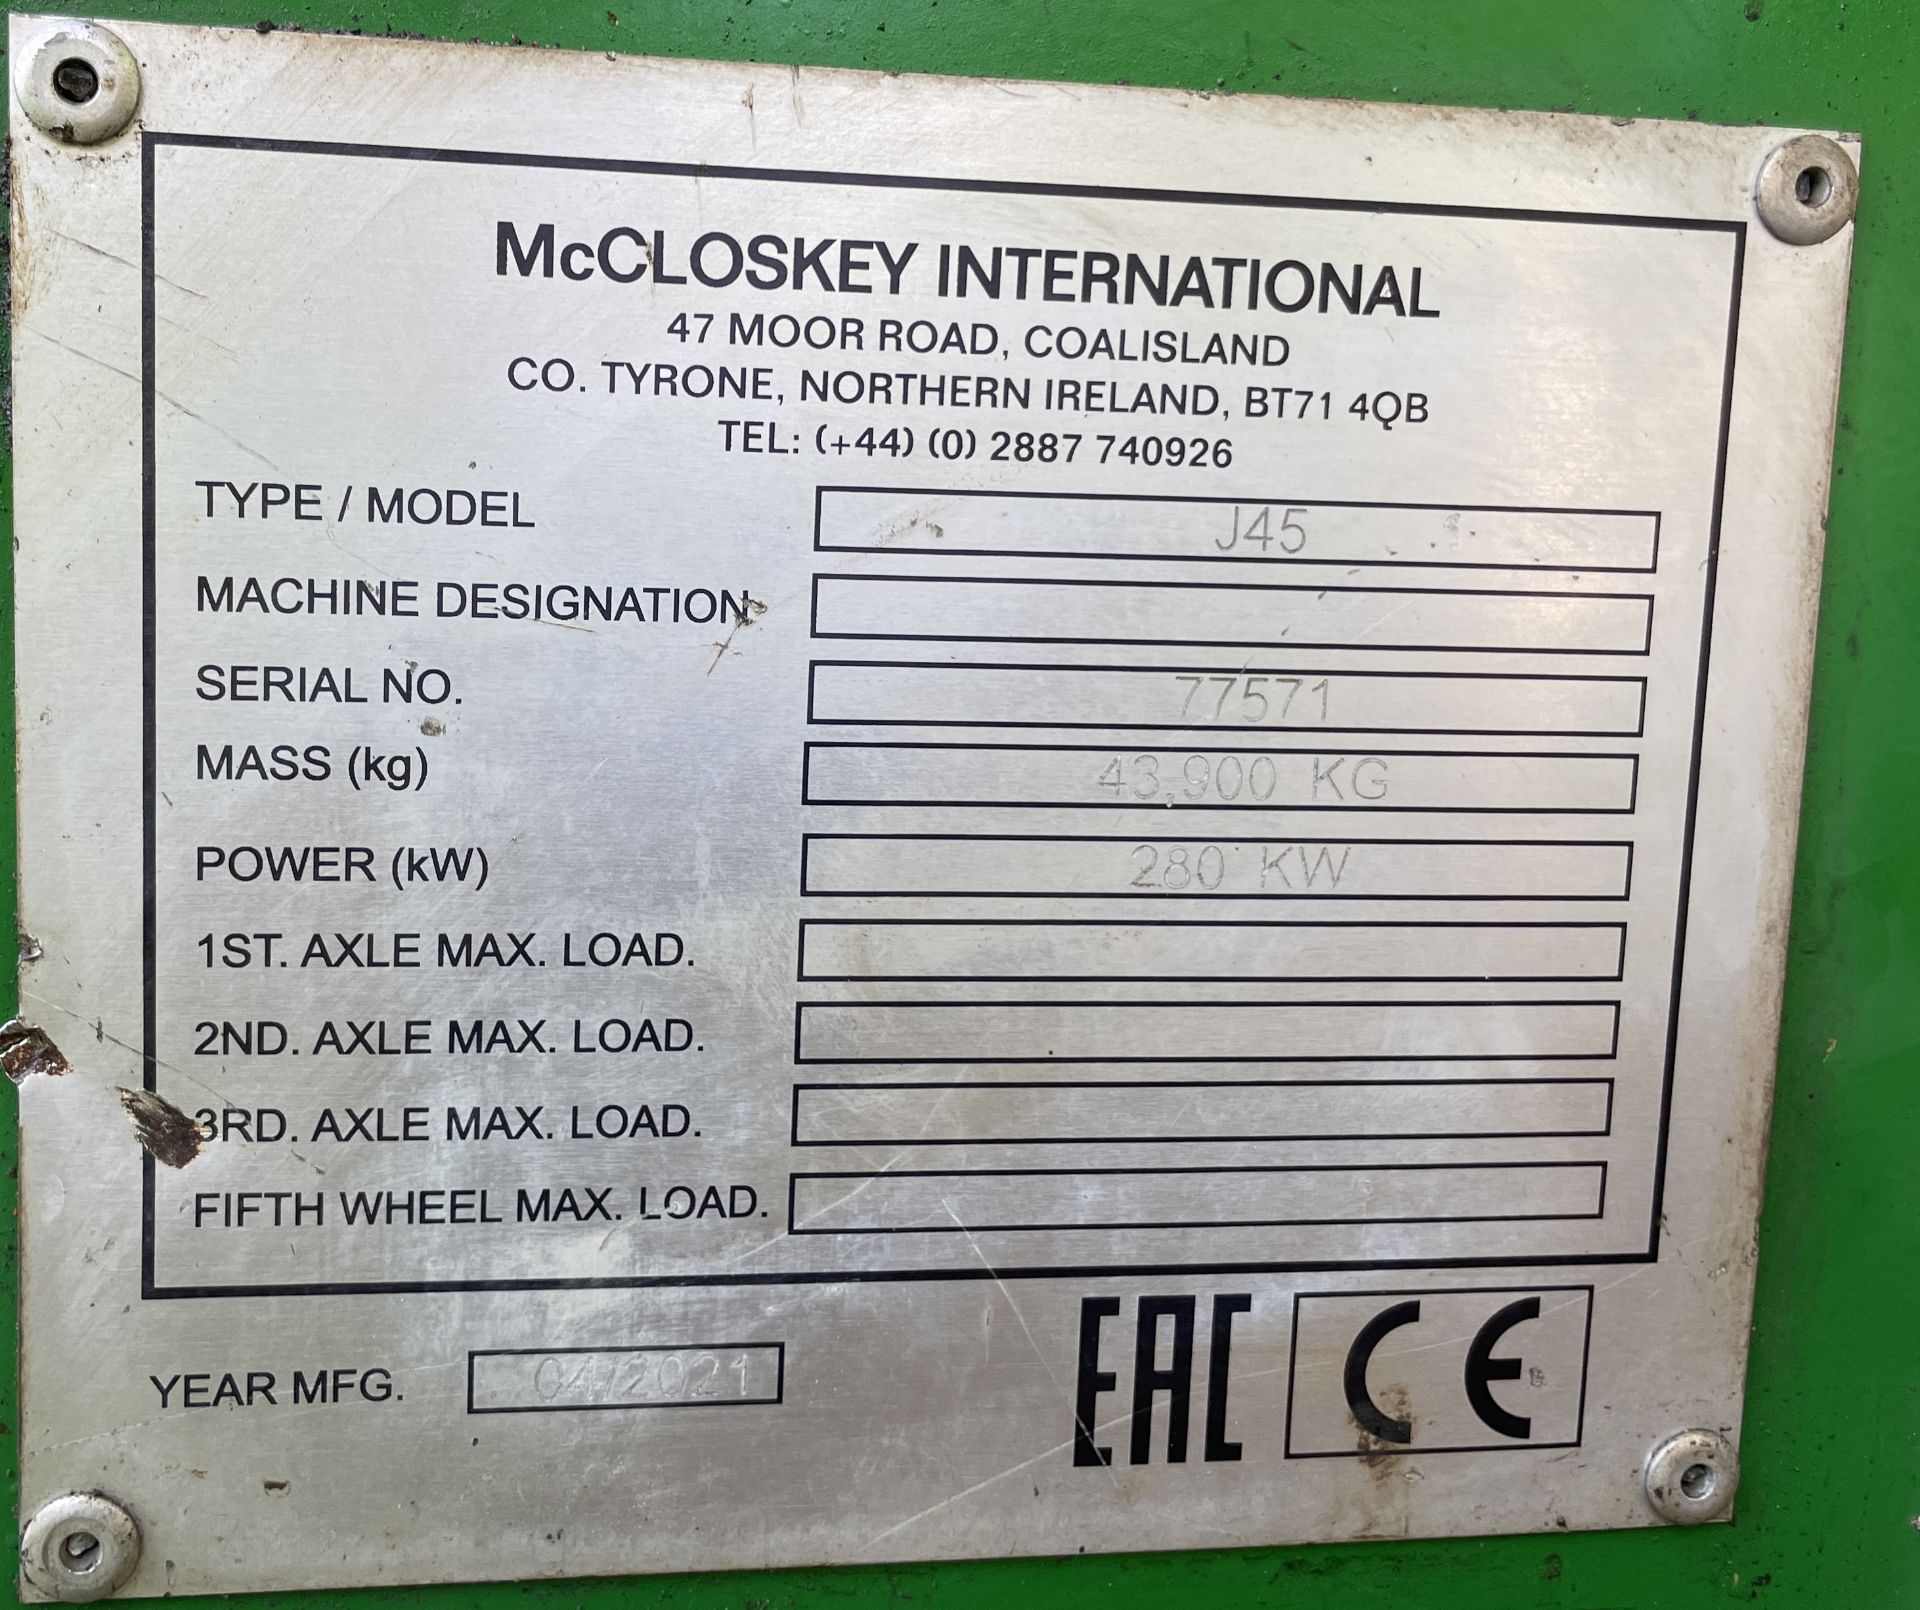 McCloskey J45 TRACK MOUNTED CRUSHER, serial no. 77571, mass kg 43,900kg, power (kW) 280, year - Image 2 of 5